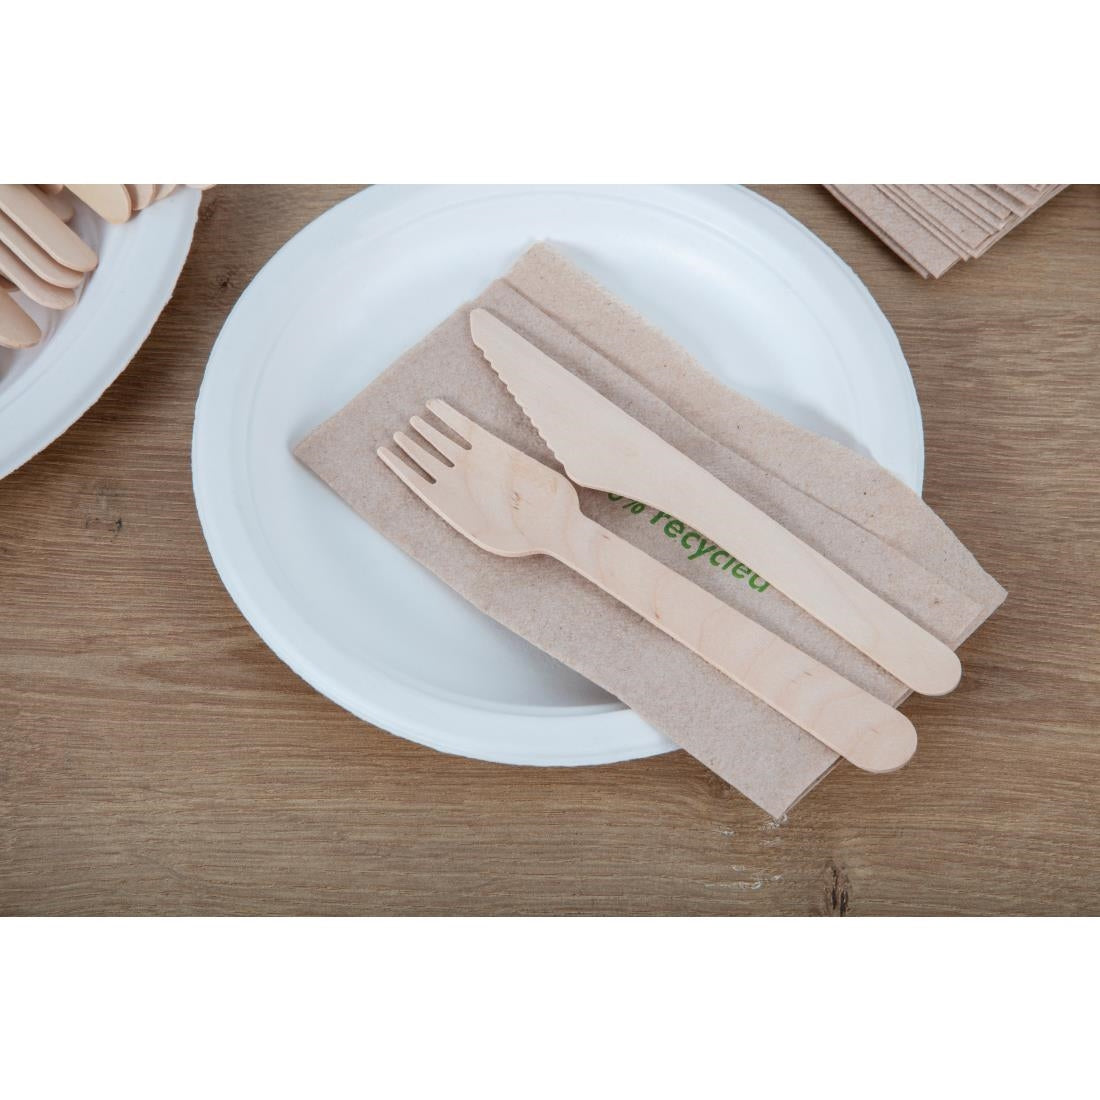 Fiesta Green Biodegradable Disposable Wooden Knives (Pack of 100) JD Catering Equipment Solutions Ltd